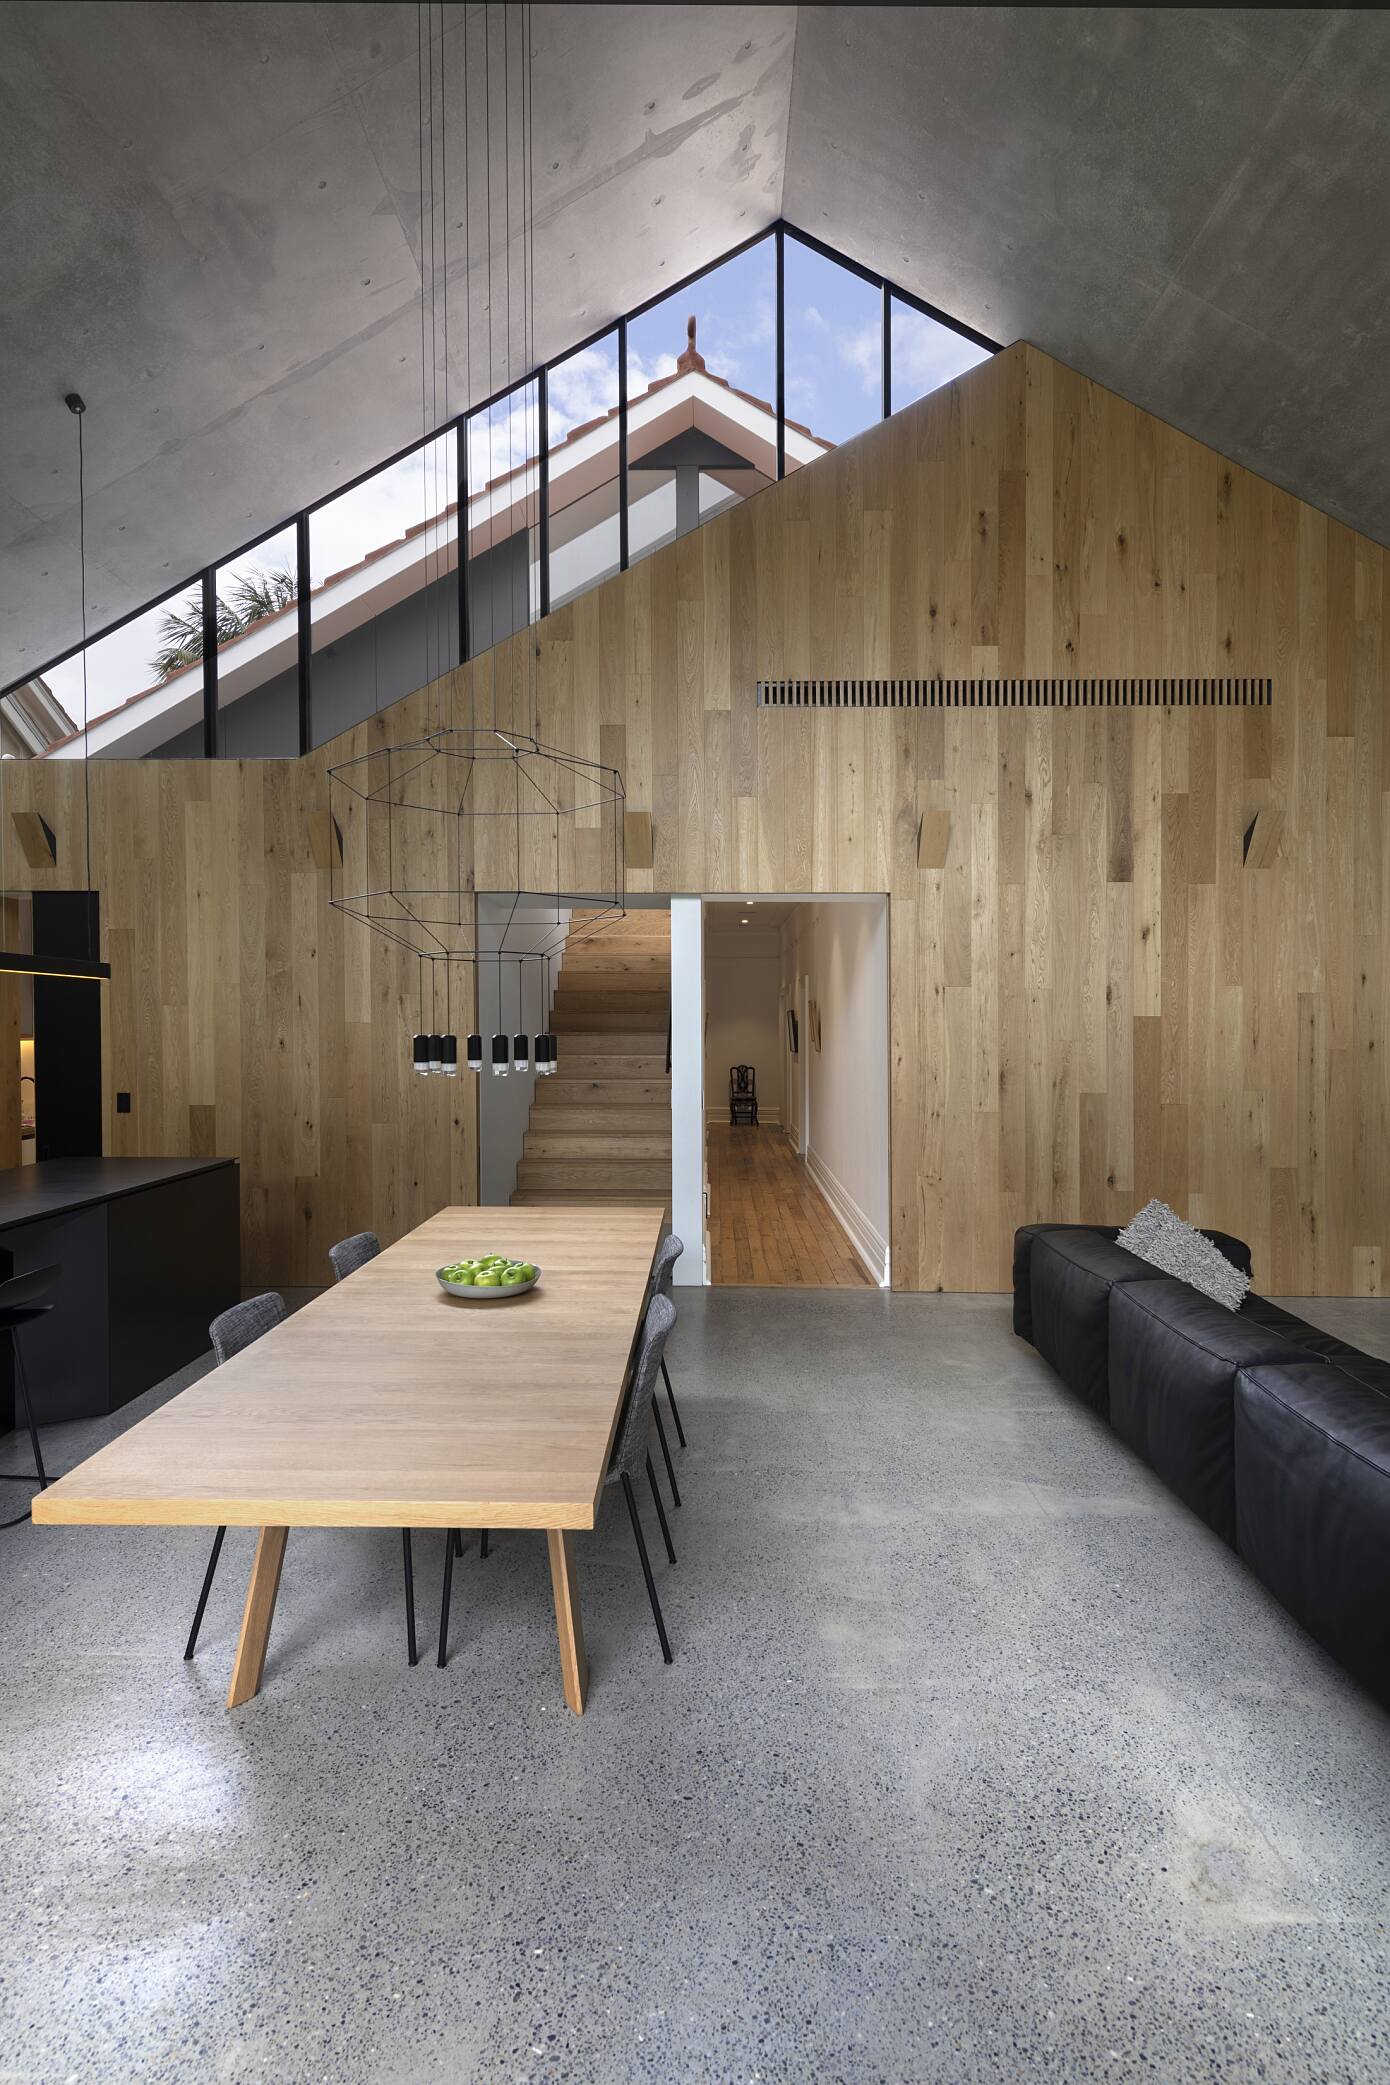 009-extruded-house-mck-architecture-interiors